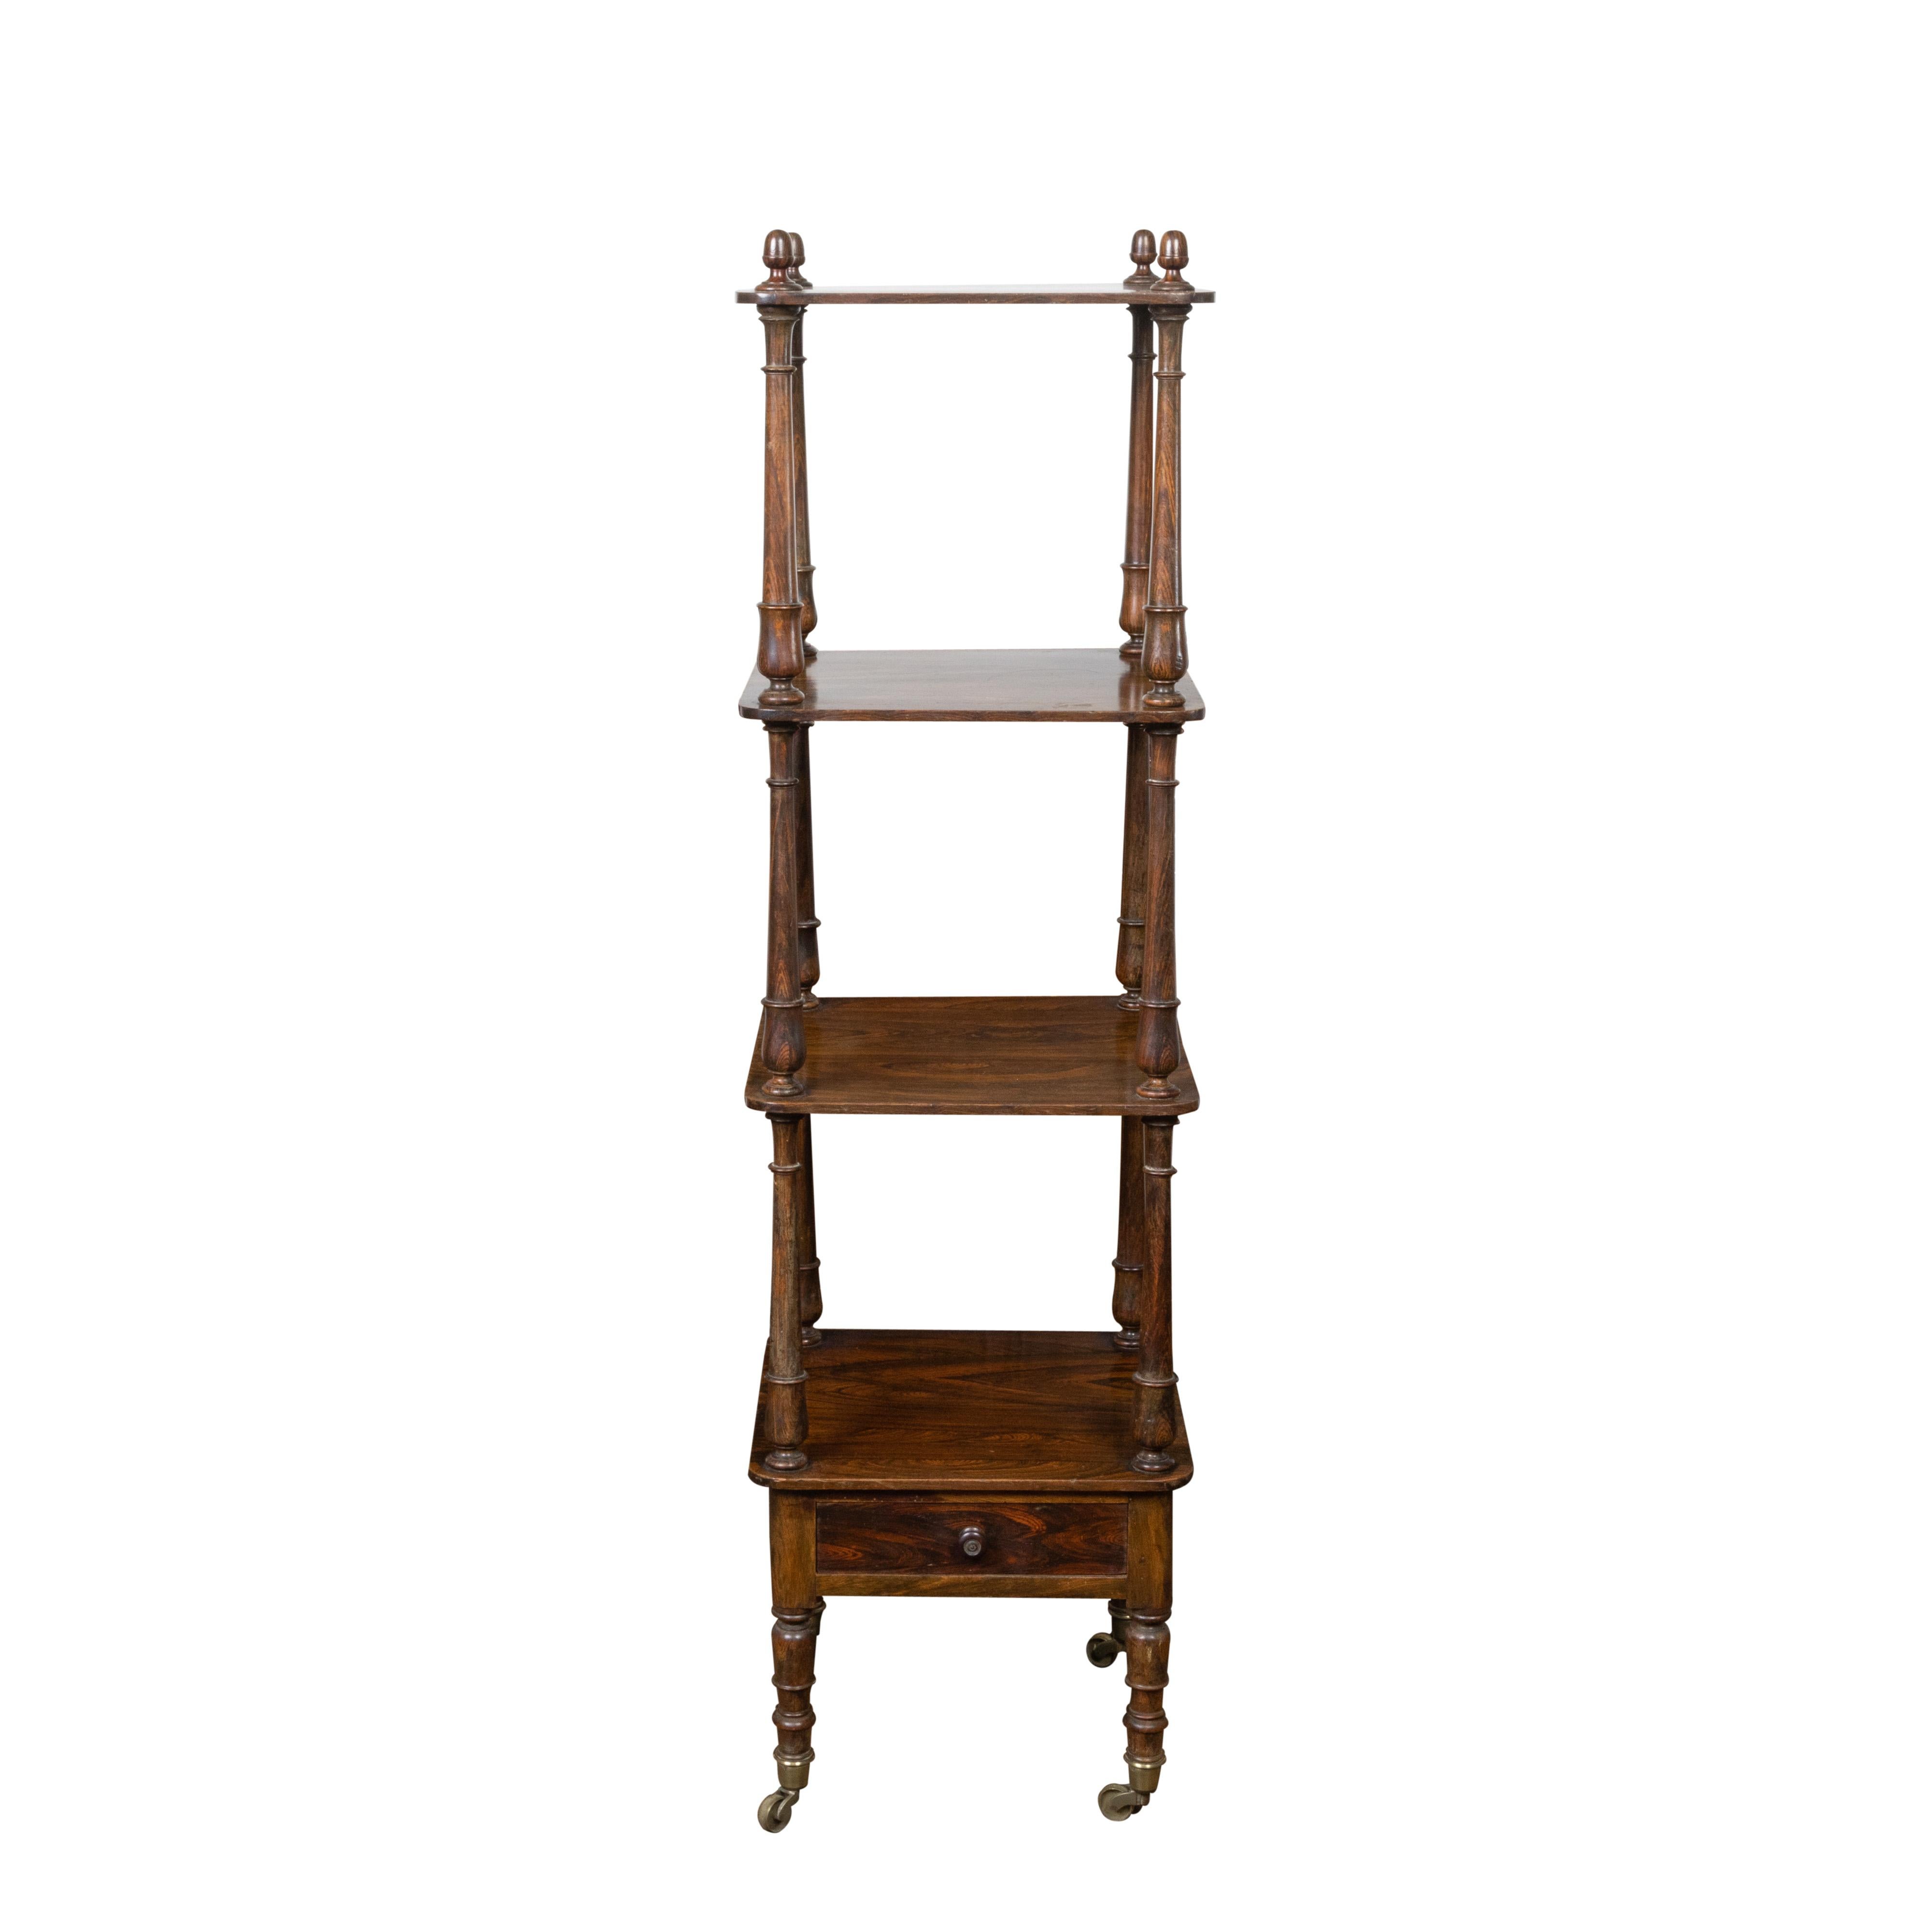 English 19th Century Wooden Trolley with Three Shelves and Single Drawer